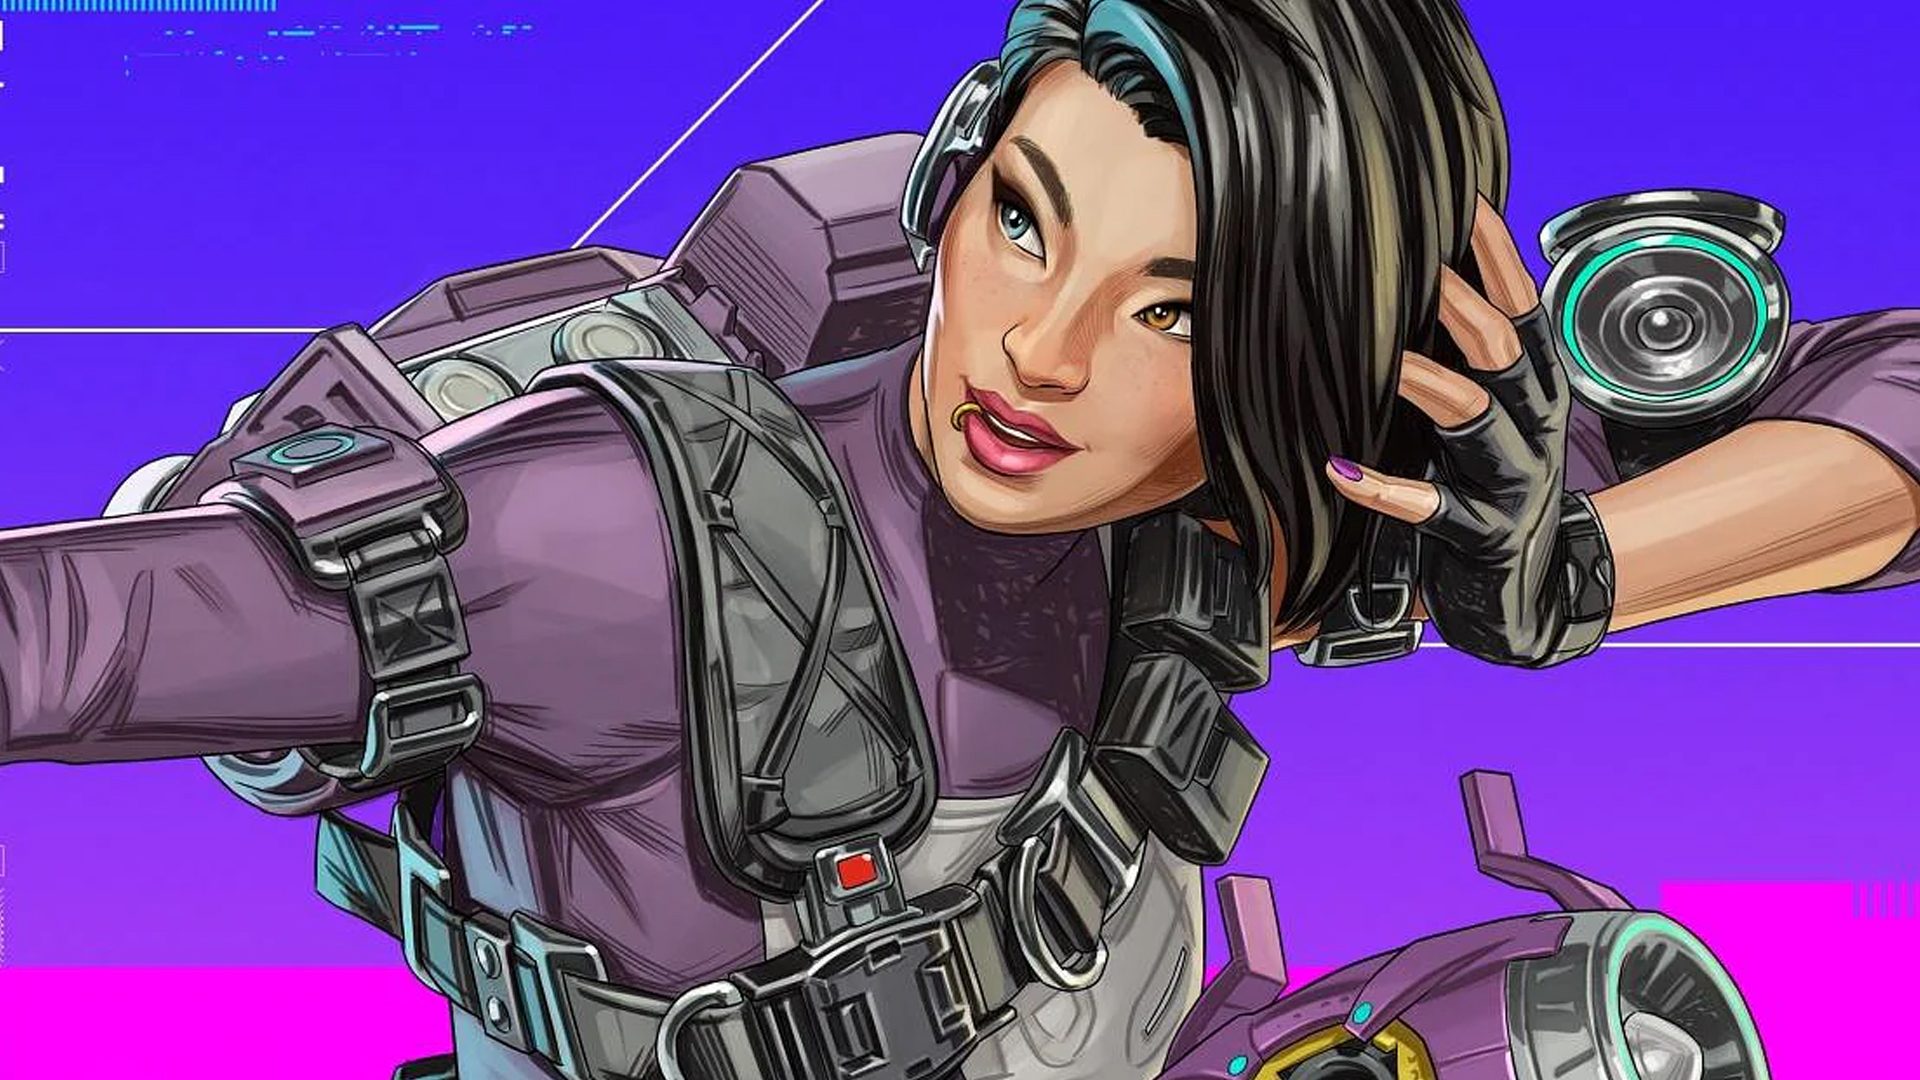 Apex Legends Mobile Now Available With New Legend, Fade! - QooApp News